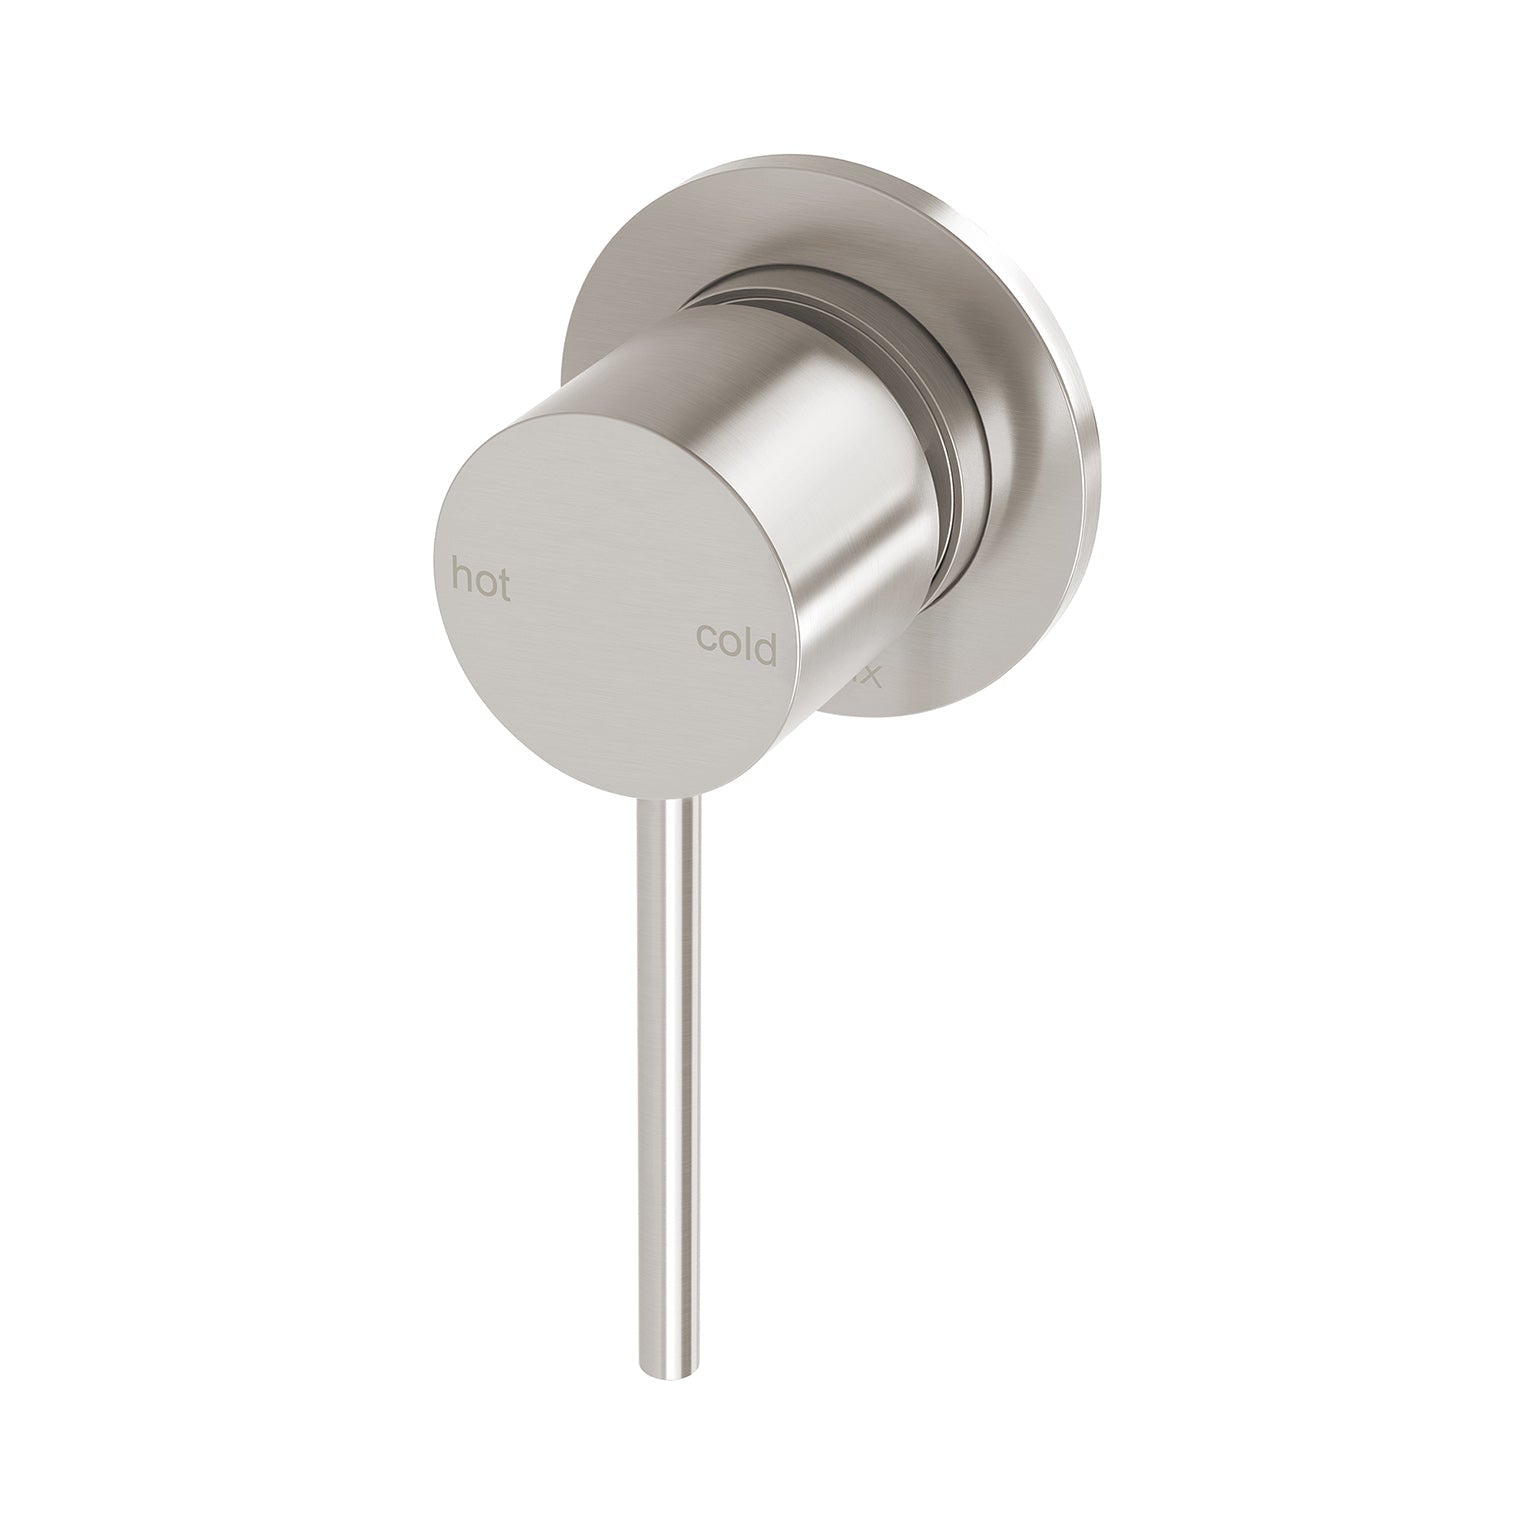 PHOENIX VIVID SLIMLINE SWITCHMIX SHOWER / WALL MIXER BACKPLATE FIT-OFF AND ROUGH-IN KIT 60MM BRUSHED NICKEL